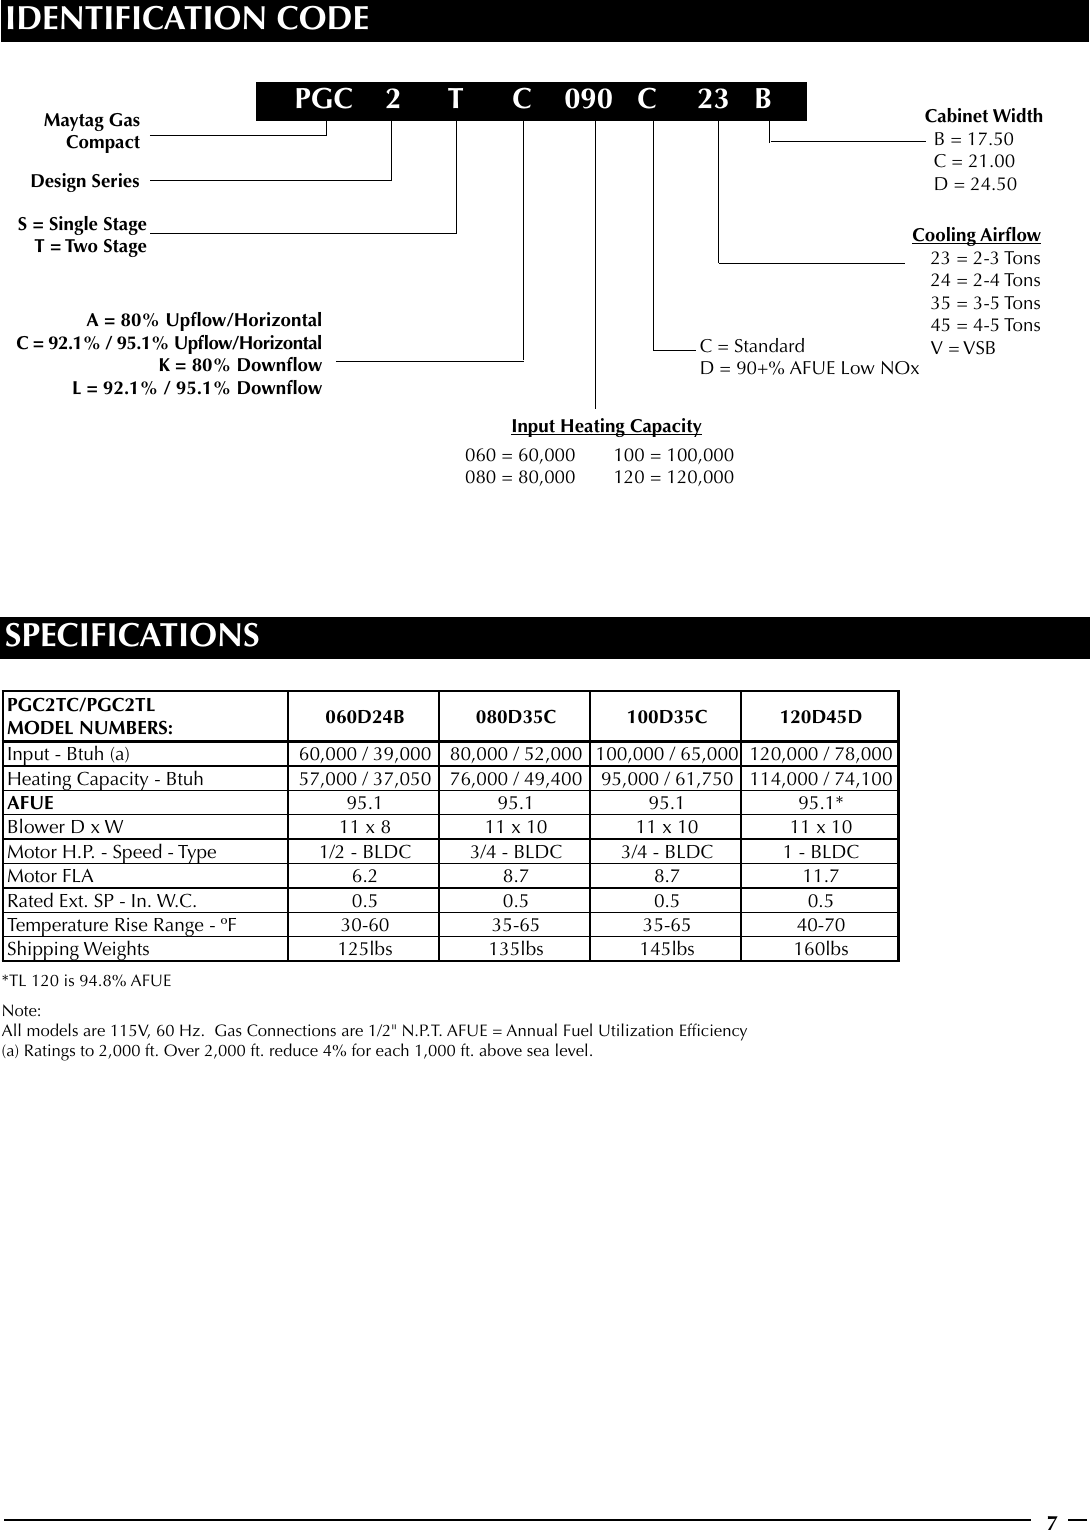 Page 7 of 8 - Maytag Maytag-Pgc2Tc-Pgc2Tl-Maytag-M1200-95-1-Afue-Two-Stage-Fixed-Speed-Gas-Furnace-Technical-Literature- PGC2T(C,L) Series Gas Furnaces Technical Specifications  Maytag-pgc2tc-pgc2tl-maytag-m1200-95-1-afue-two-stage-fixed-speed-gas-furnace-technical-literature